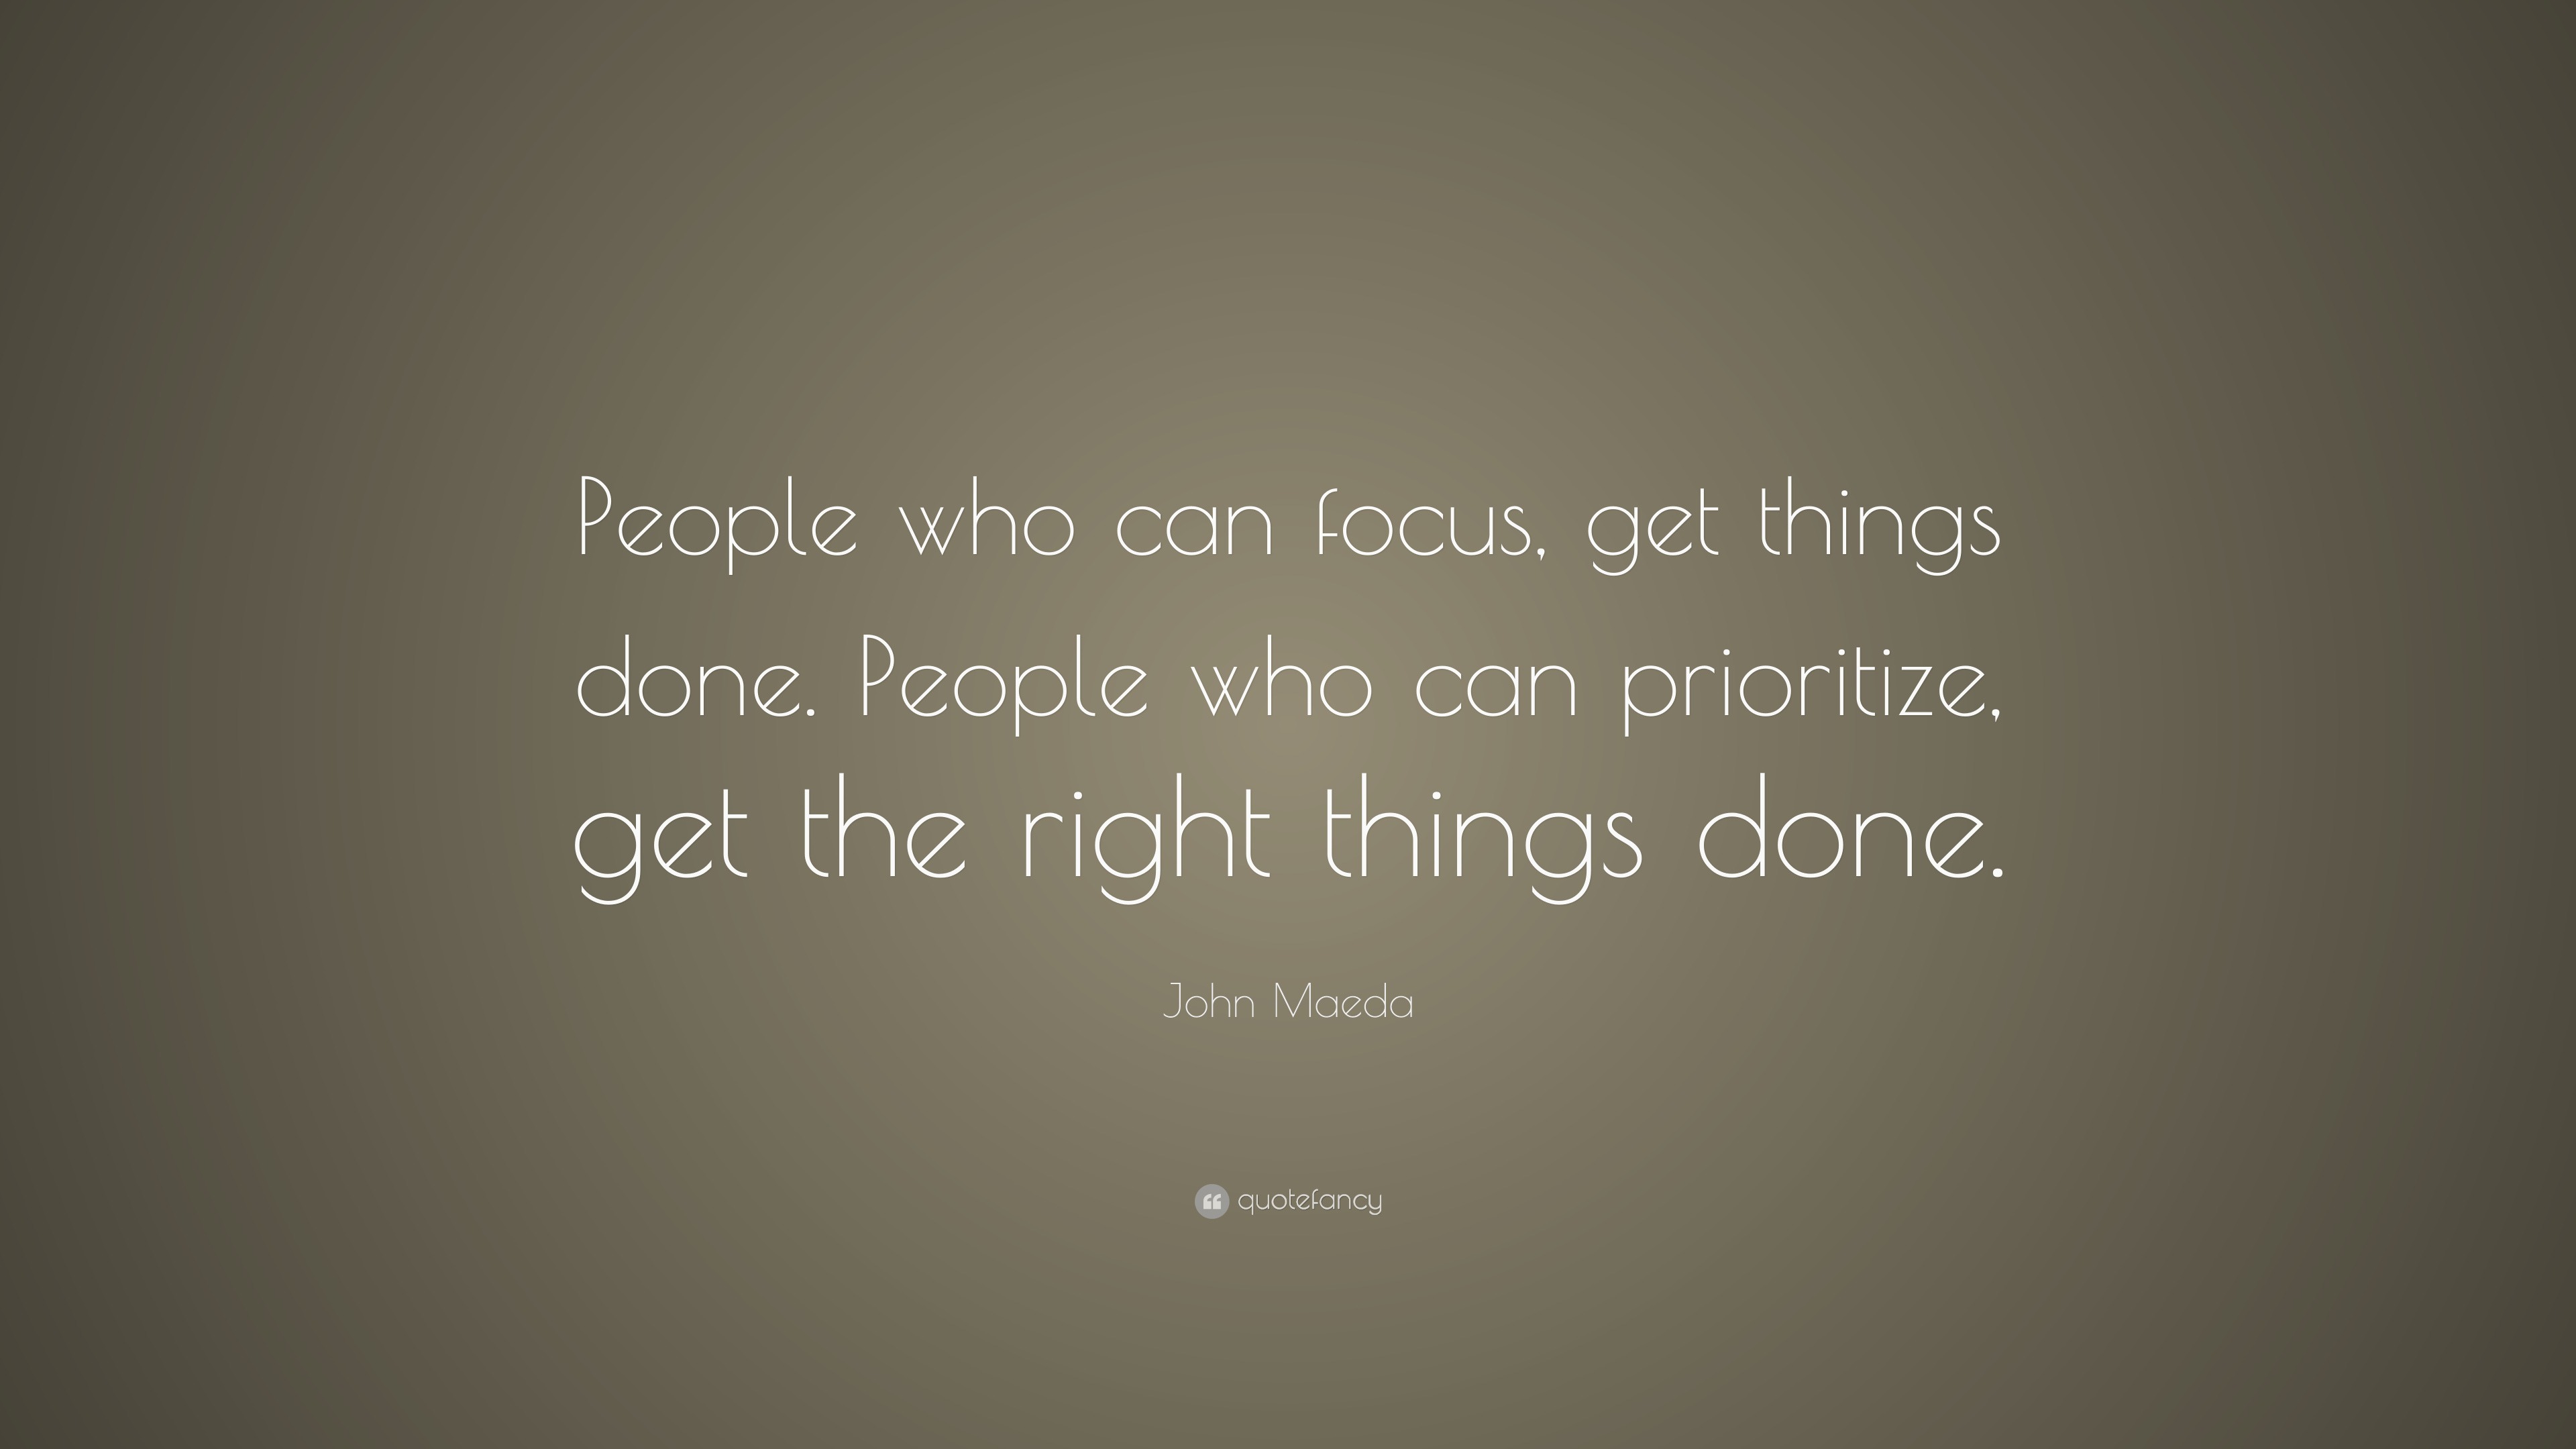 Quotes About Getting Things Done Know Your Meme Simplybe